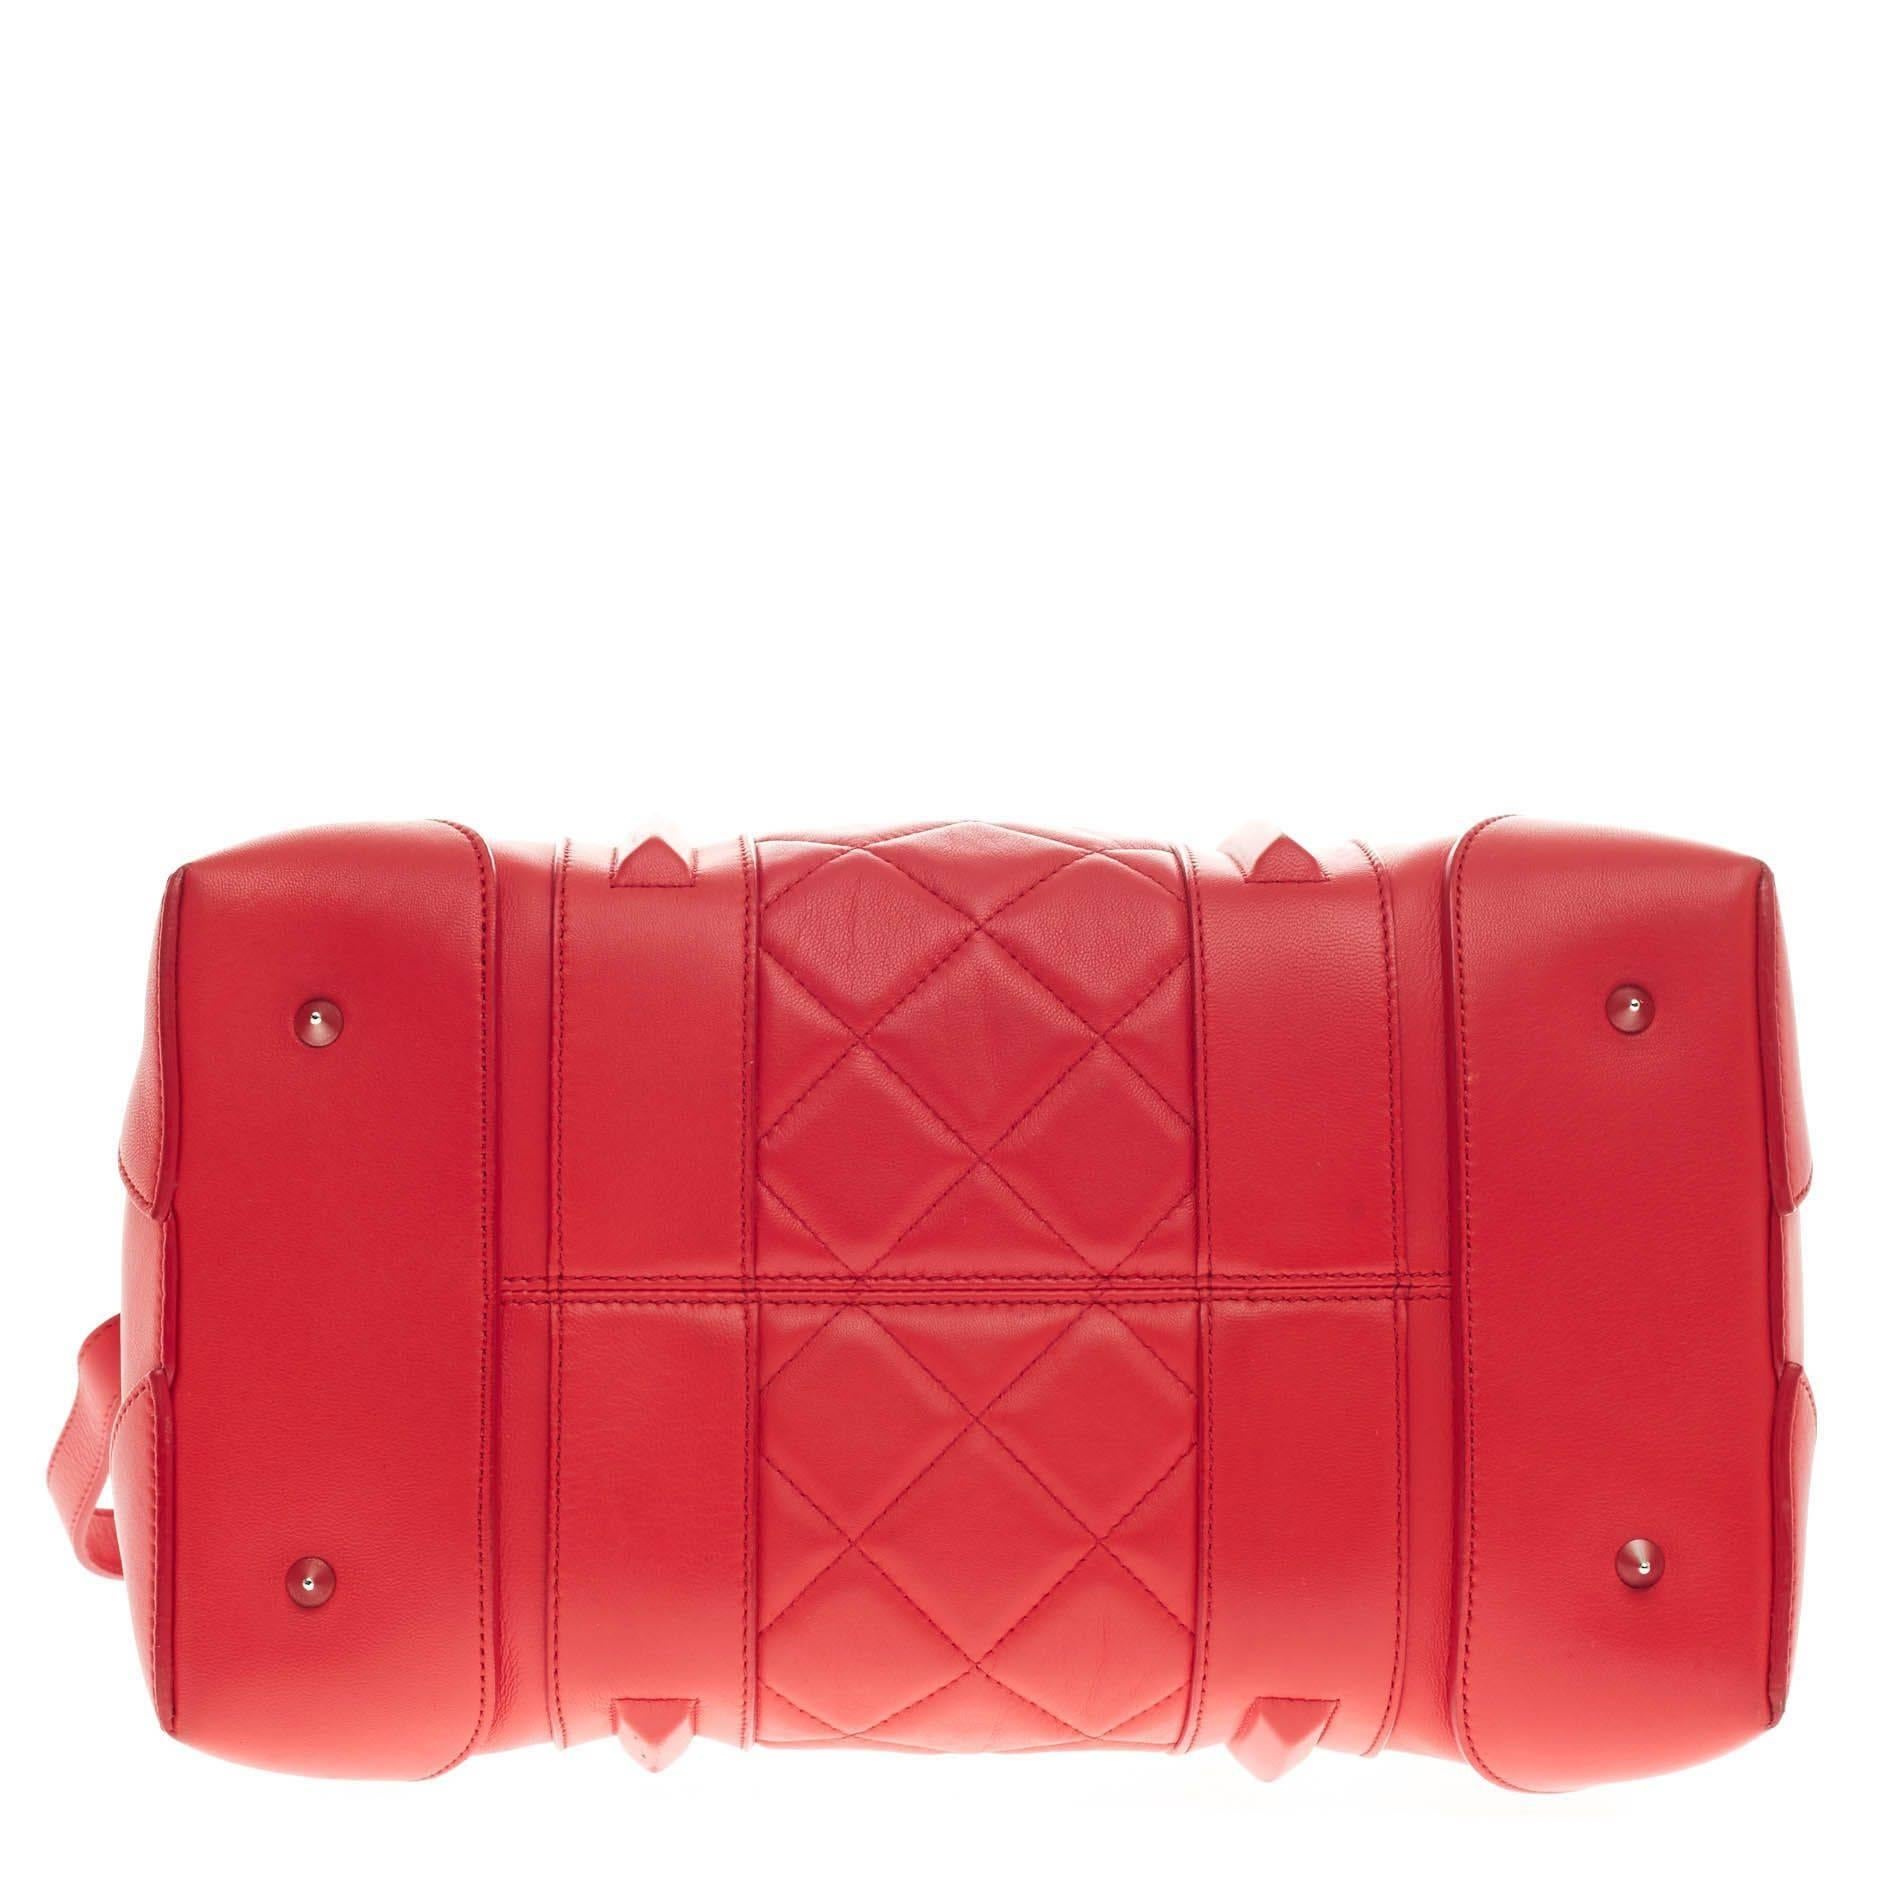 Red Givenchy Lucrezia Duffle Bag Quilted Leather Medium